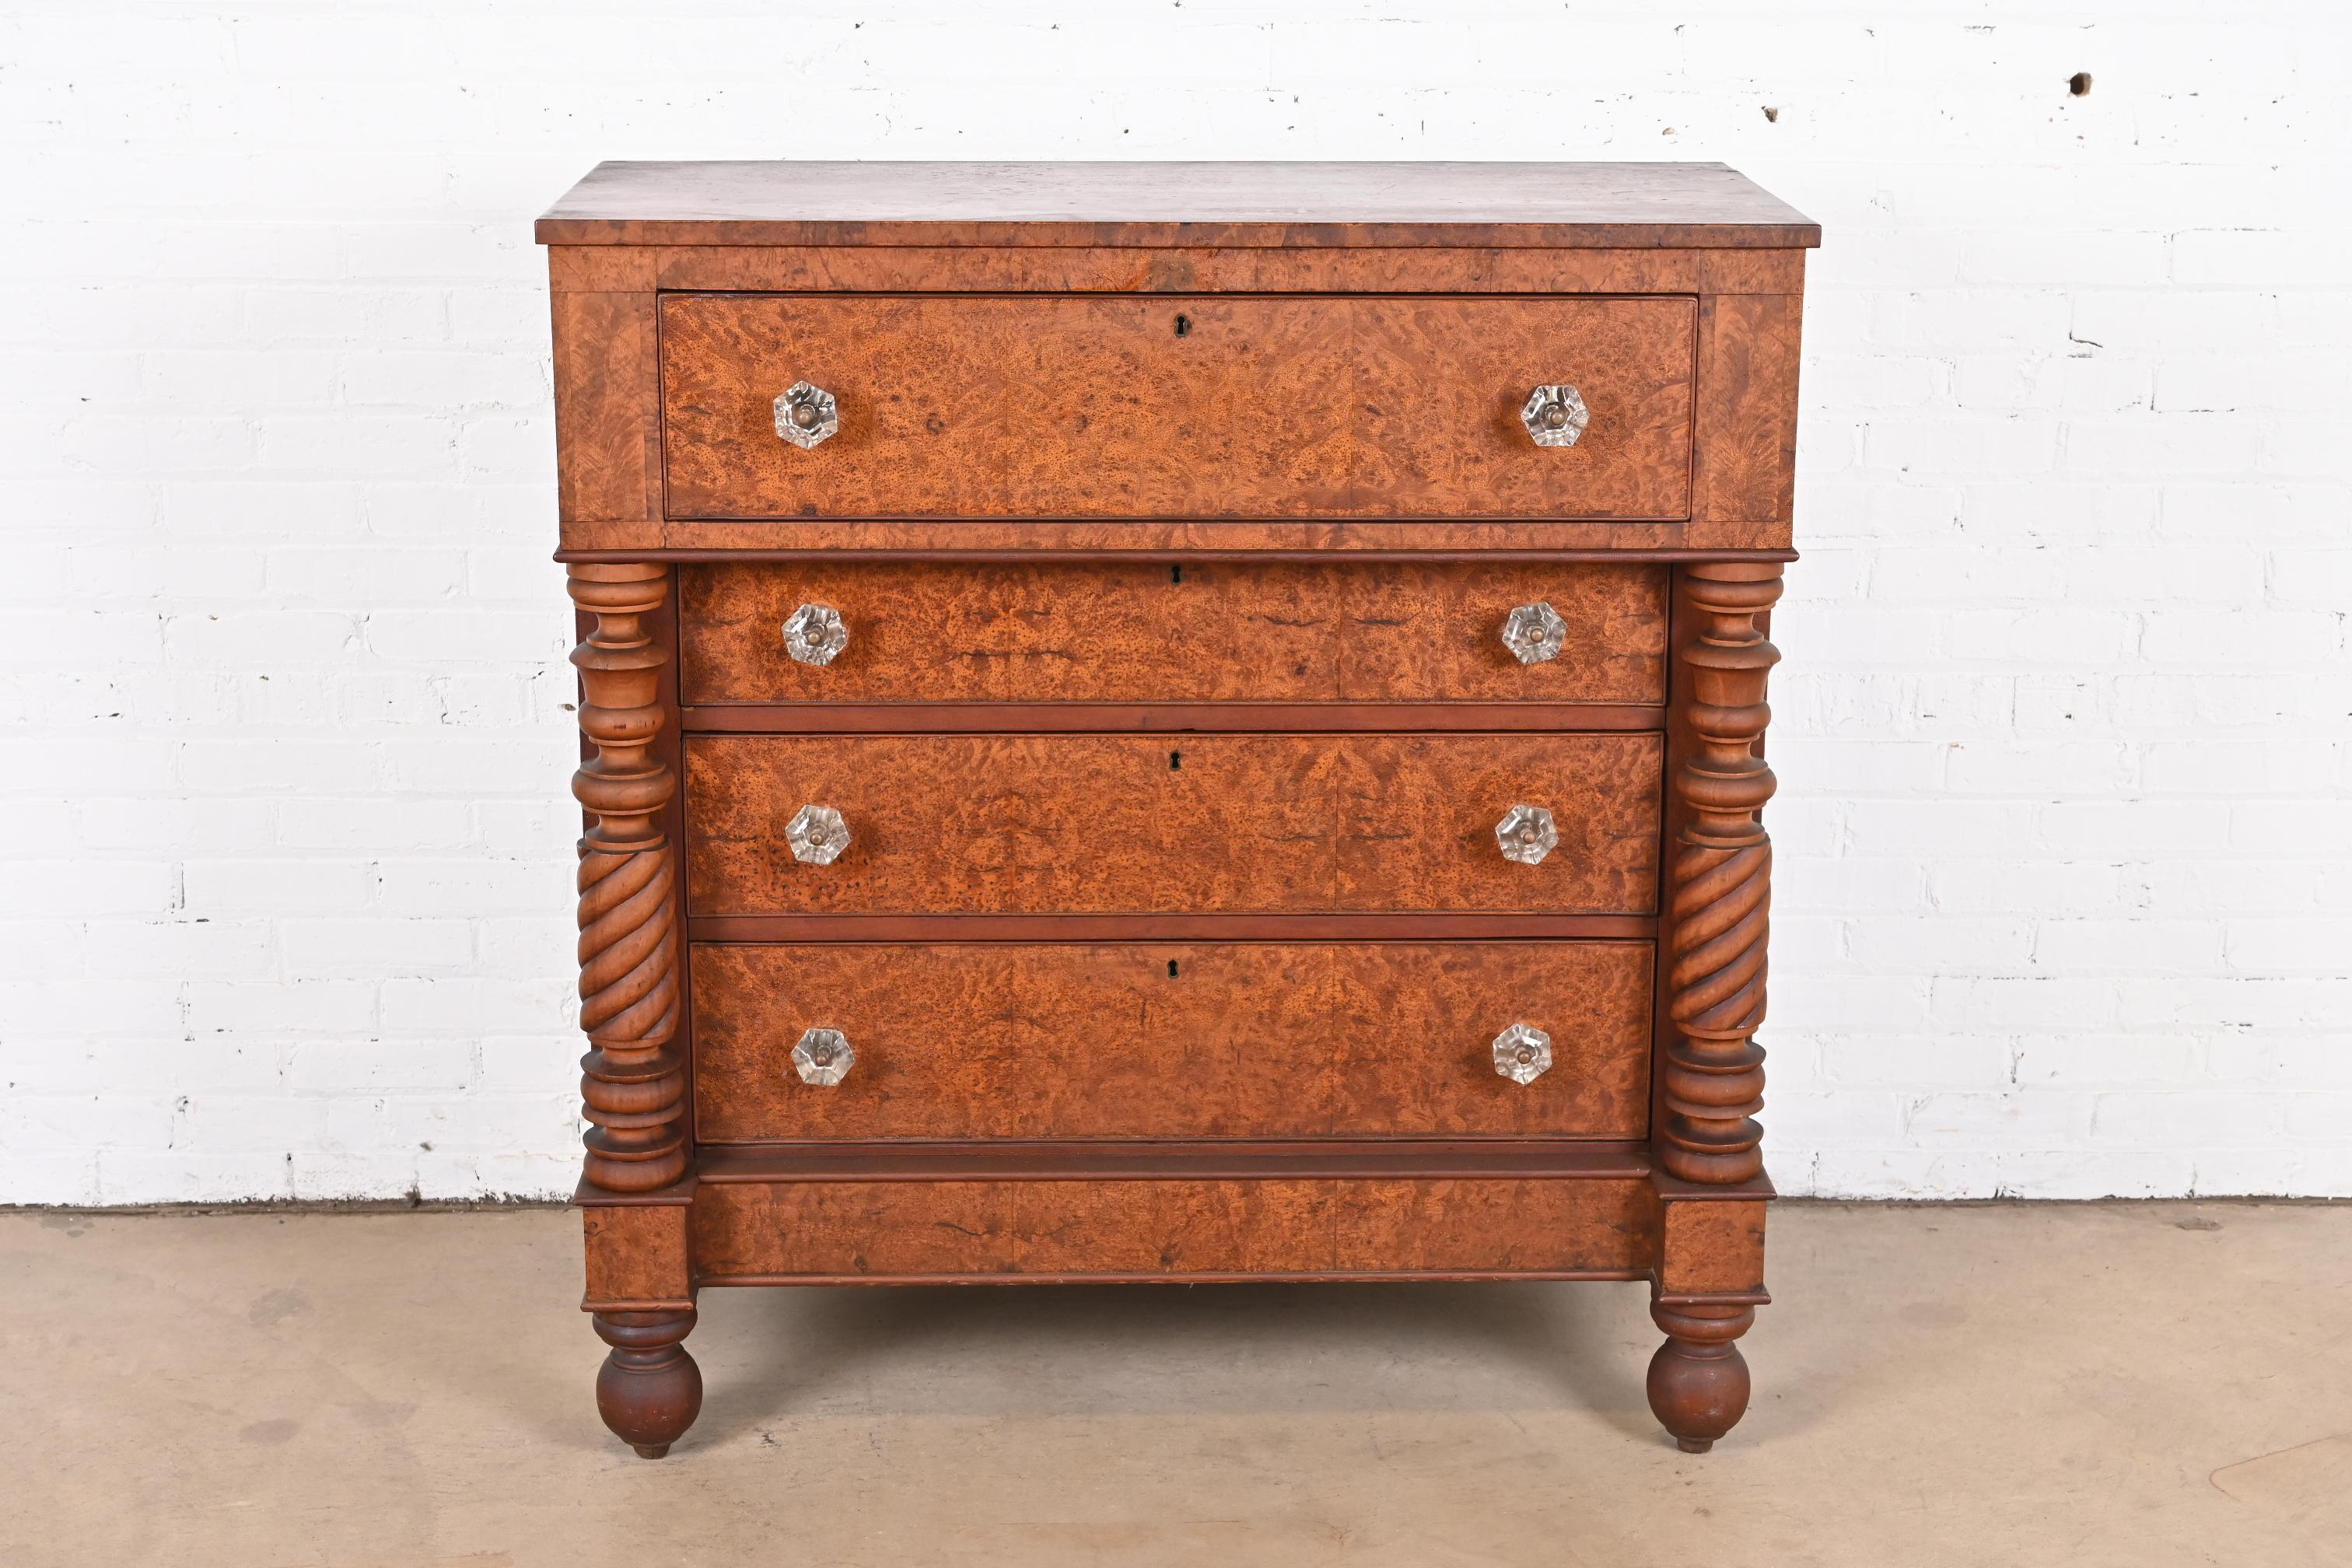 A gorgeous American Empire four-drawer highboy dresser or chest of drawers

USA, Circa 1820s

Carved cherry wood with turned columns, burled mahogany drawer fronts, and glass drawer pulls.

Measures: 43.75